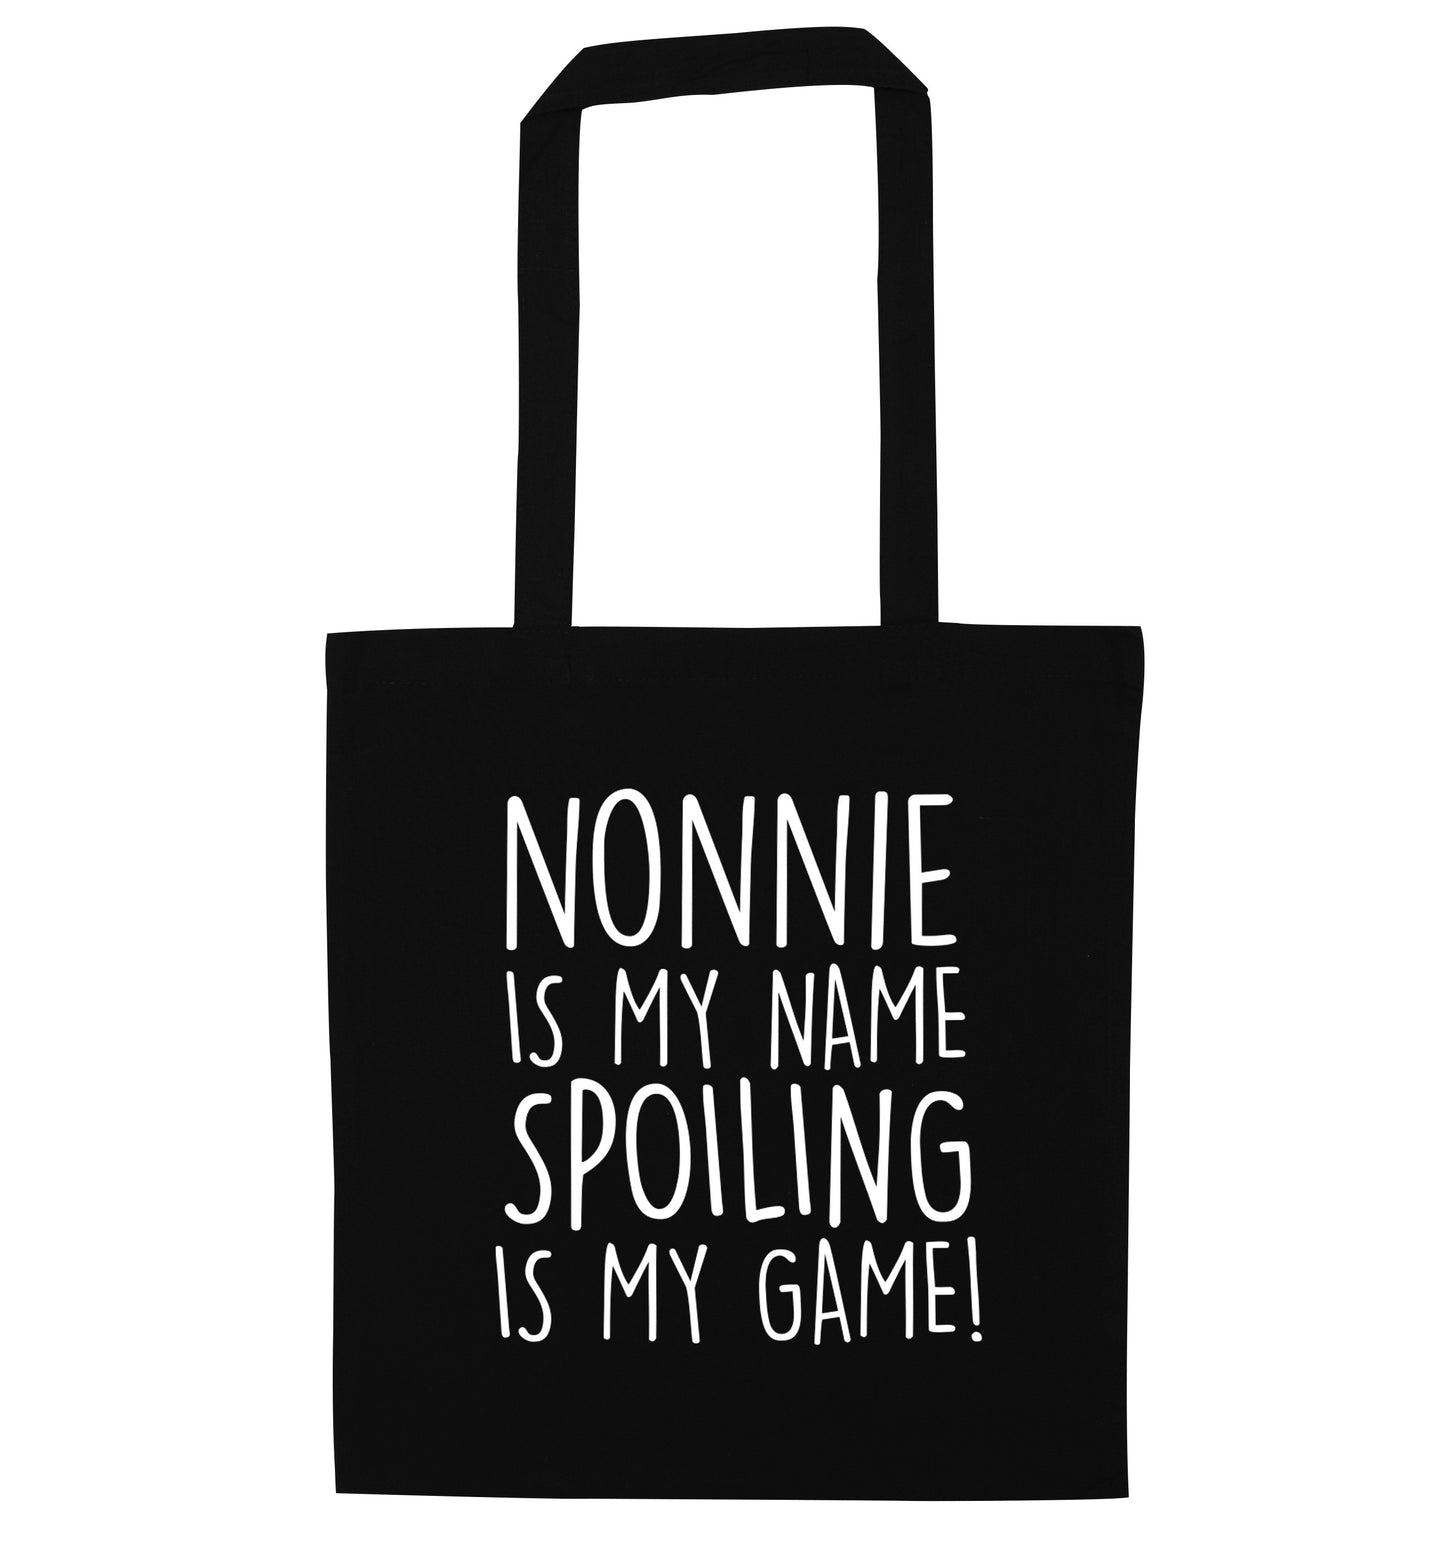 Nonnie is my name, spoiling is my game black tote bag